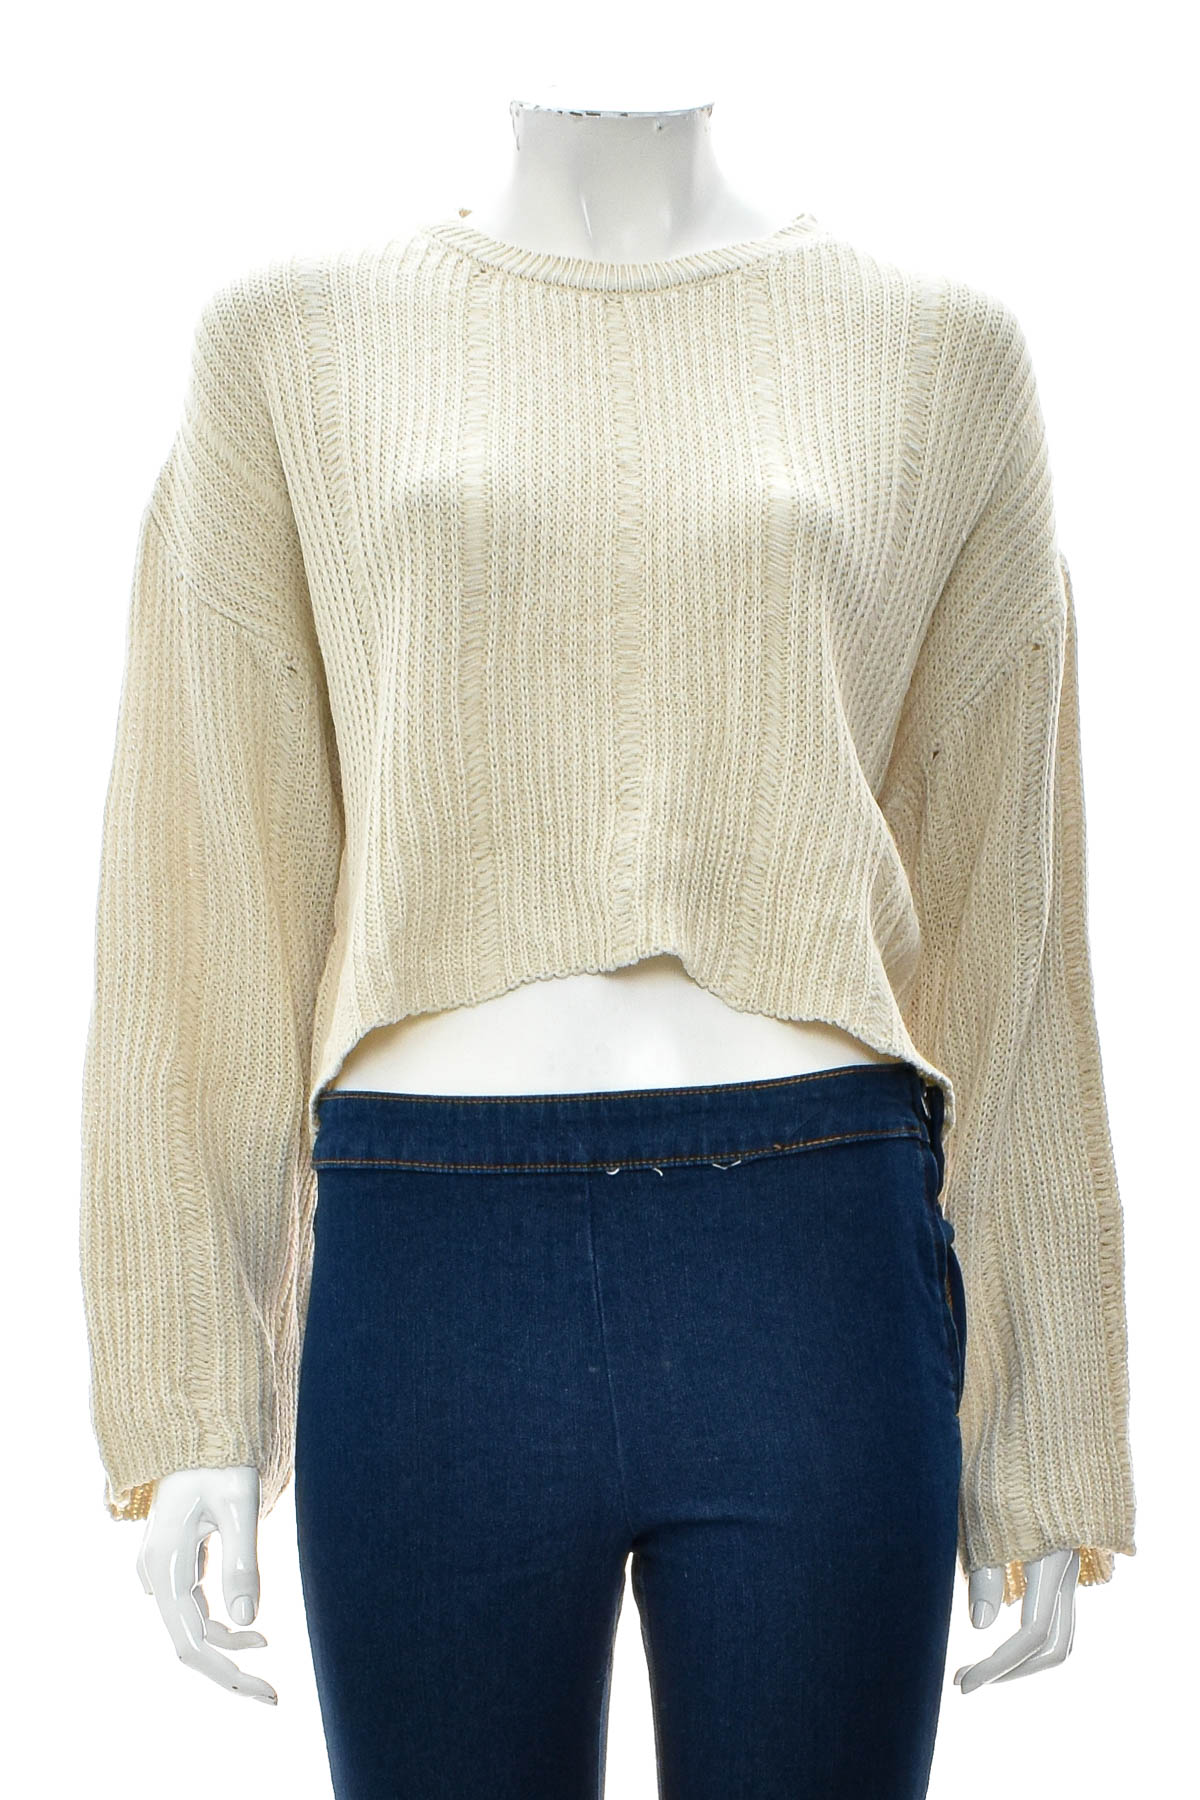 Women's sweater - Levely & Thisway - 0